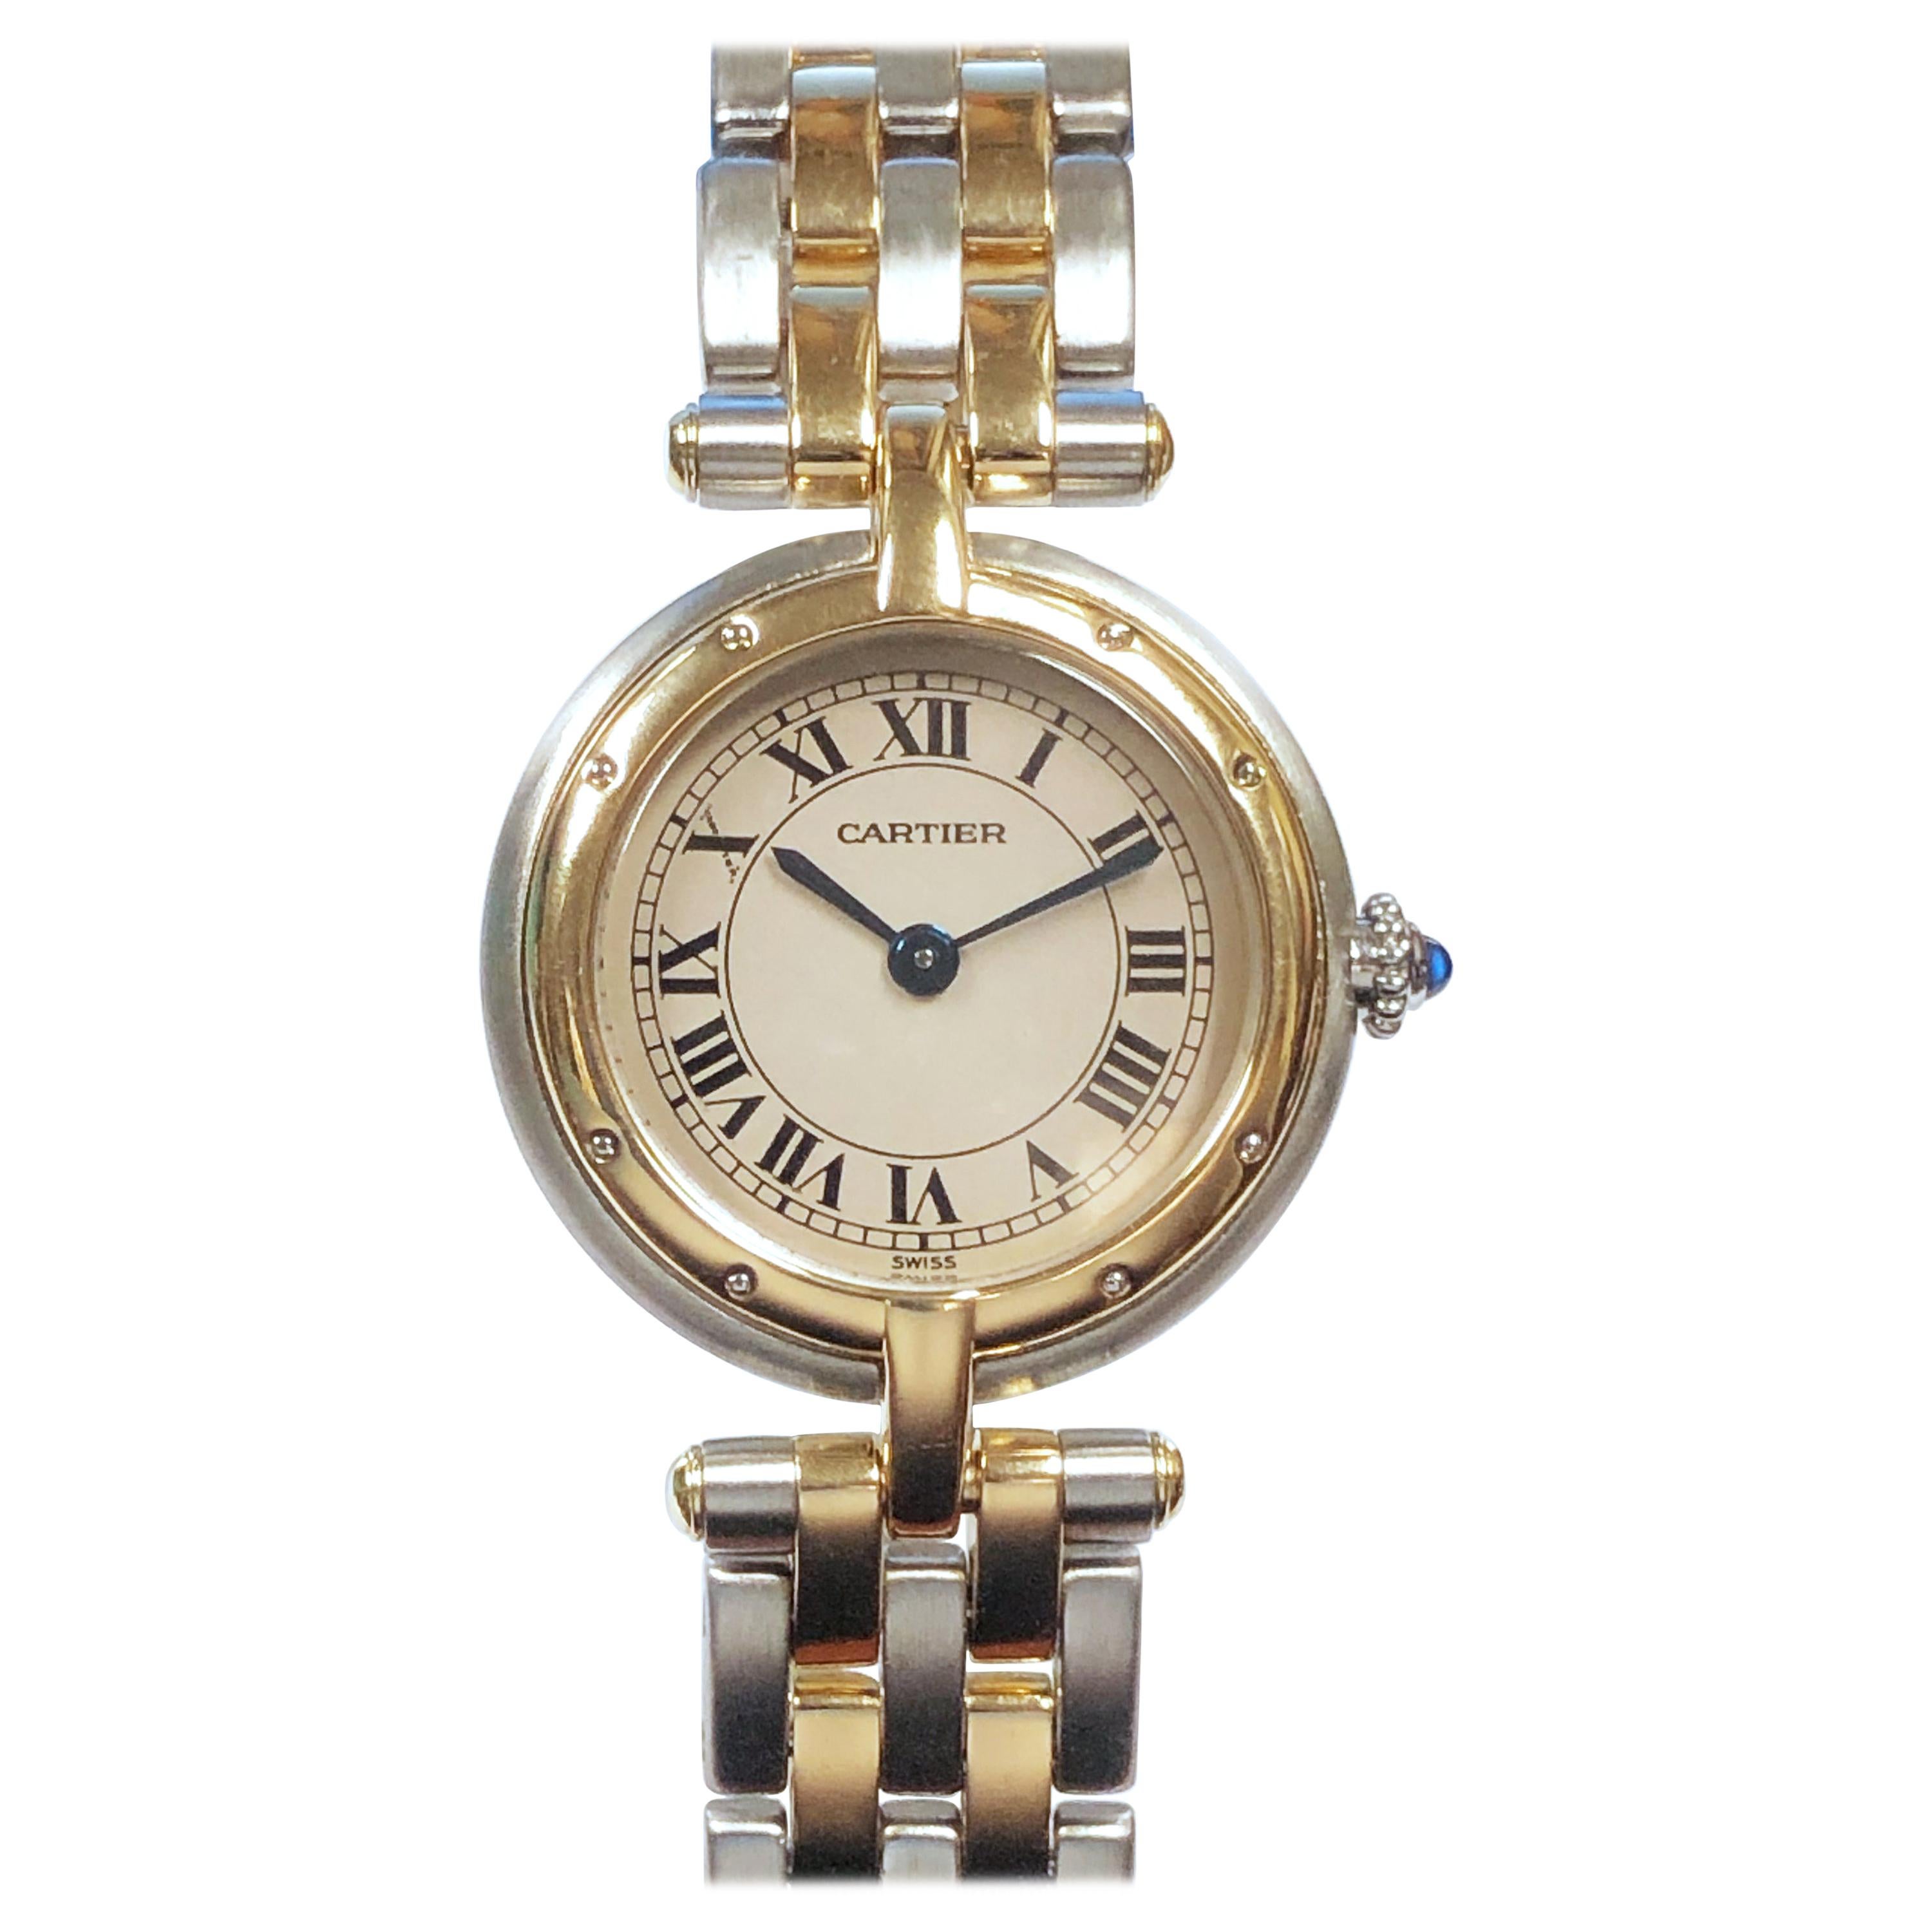 Cartier Panther Ronde - For Sale on 1stDibs